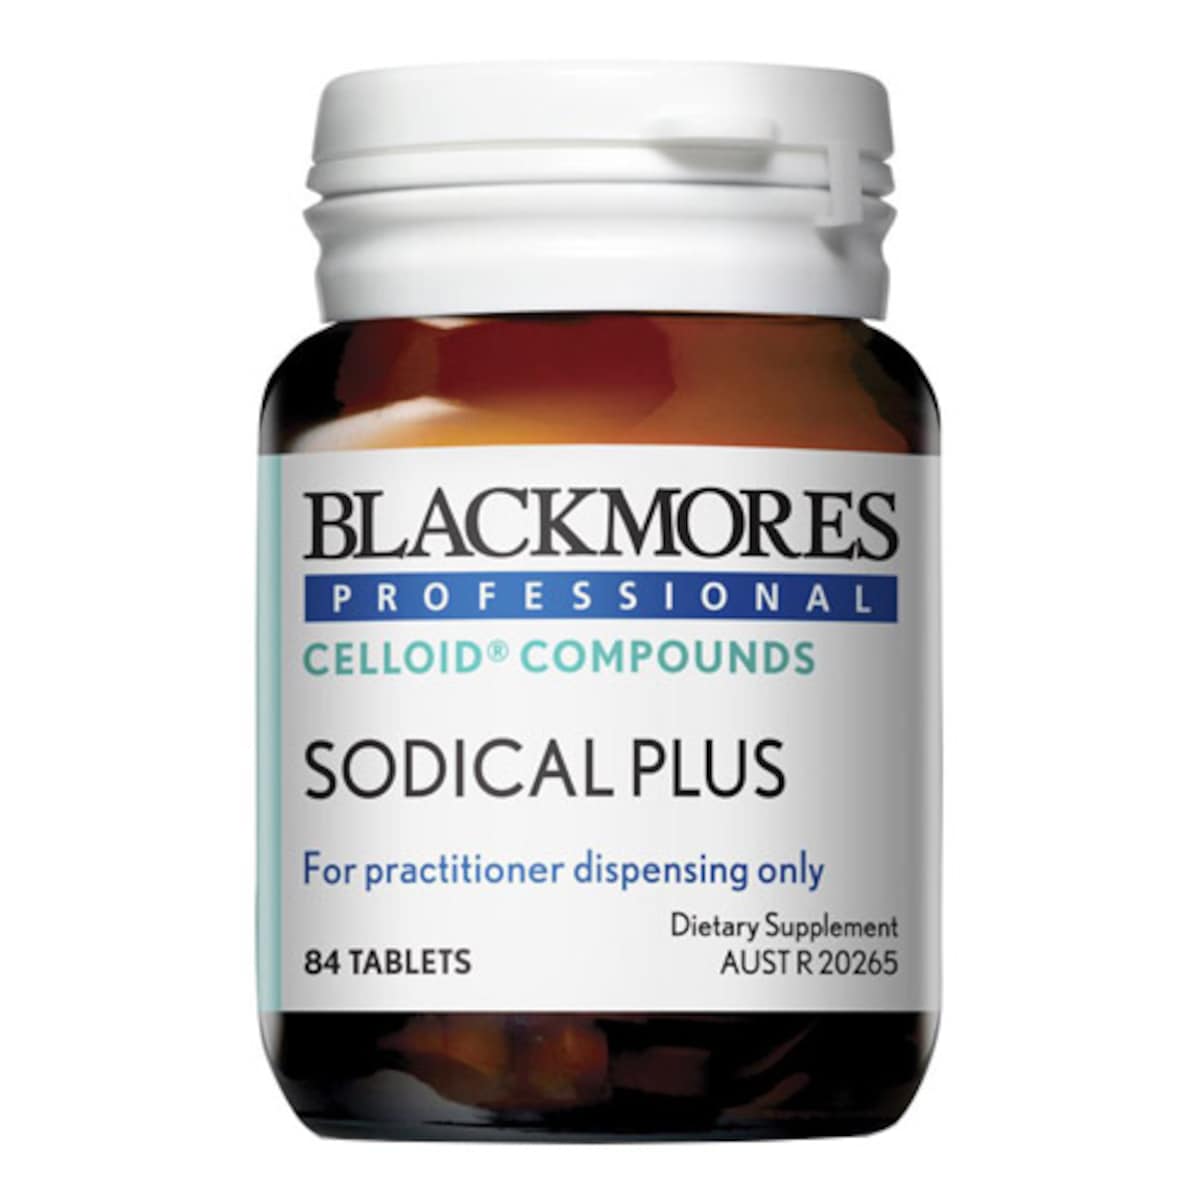 Blackmores Professional Sodical Plus 84 Tablets